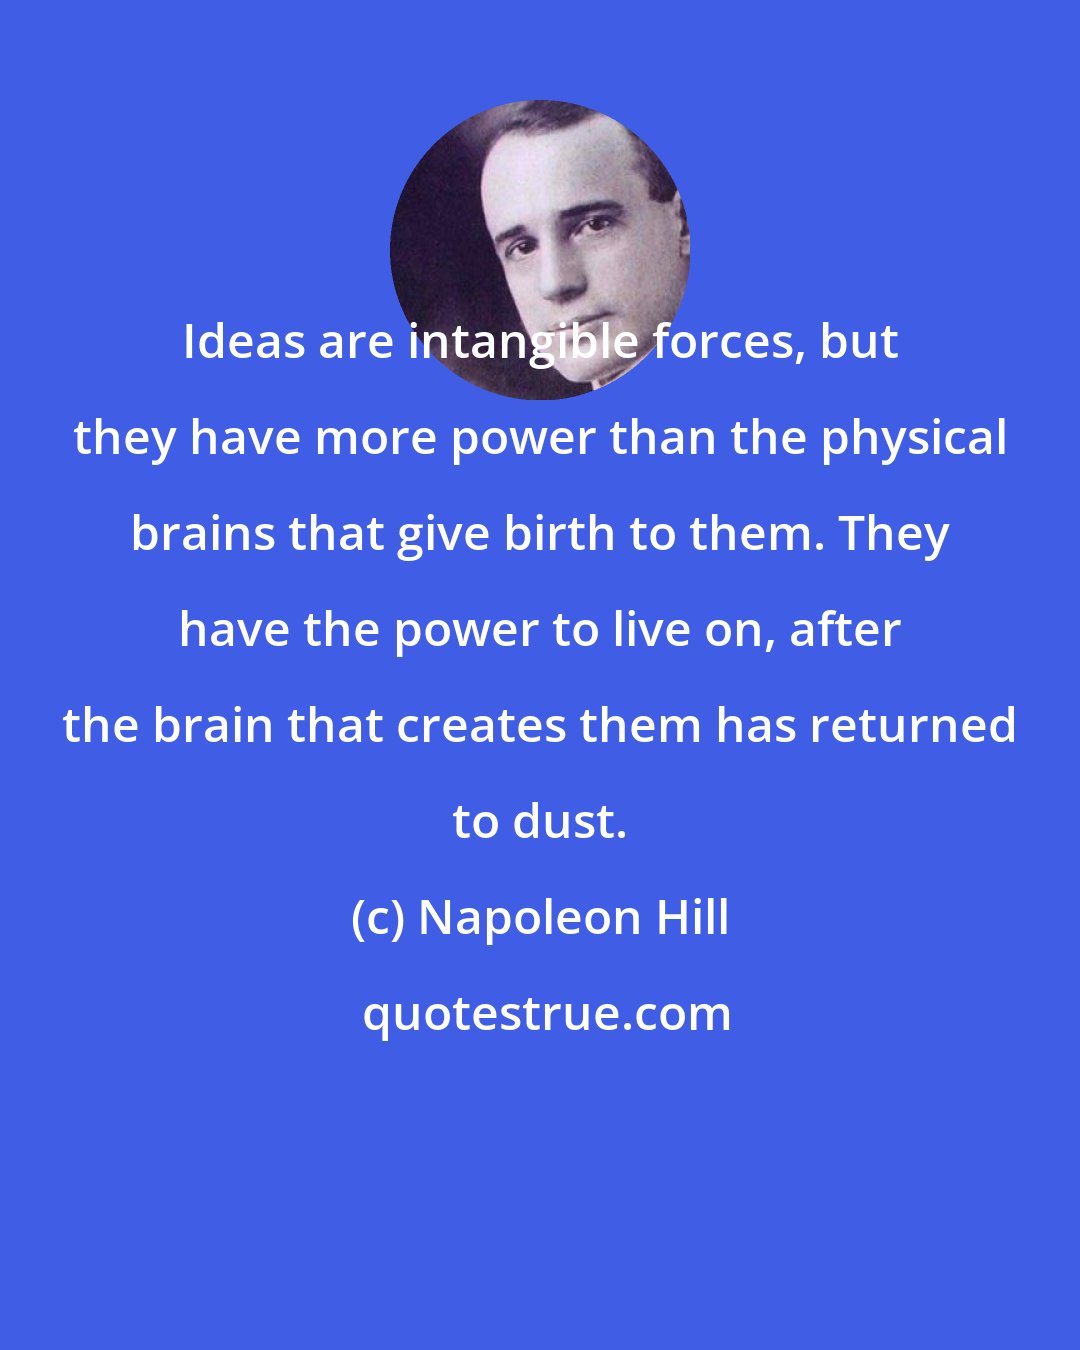 Napoleon Hill: Ideas are intangible forces, but they have more power than the physical brains that give birth to them. They have the power to live on, after the brain that creates them has returned to dust.